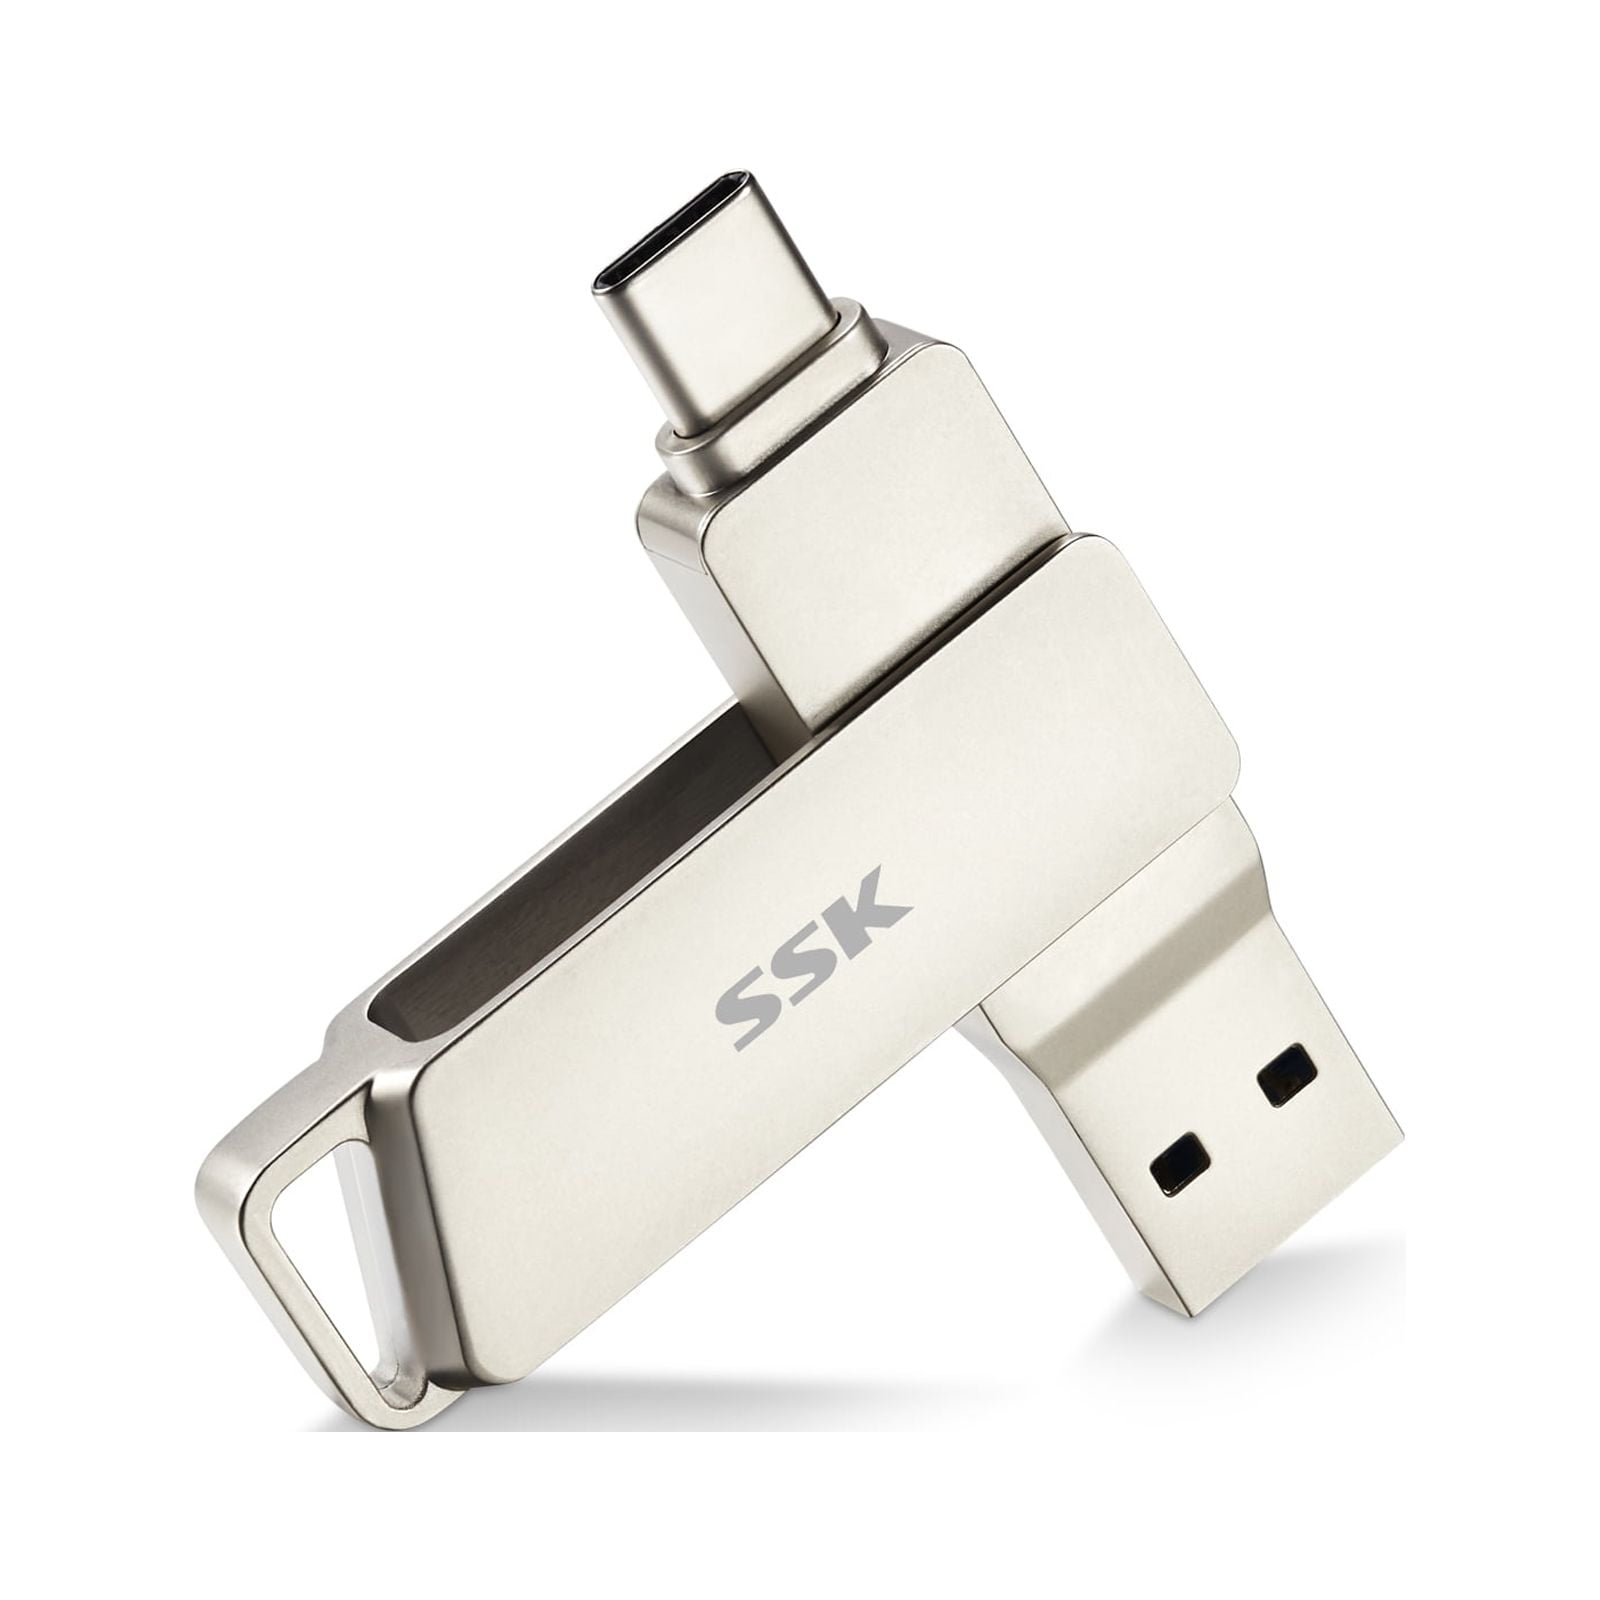 SSK 64GB USB C Flash Drive 150MB/s Transfer Speed Dual Drive 2 in 1 OTG Type -C + USB 3.1 Thumb Drive Memory Stick Jump Drive Thunderbolt 3 Compatible  for Android Phone,MacBook/Pro,and More 